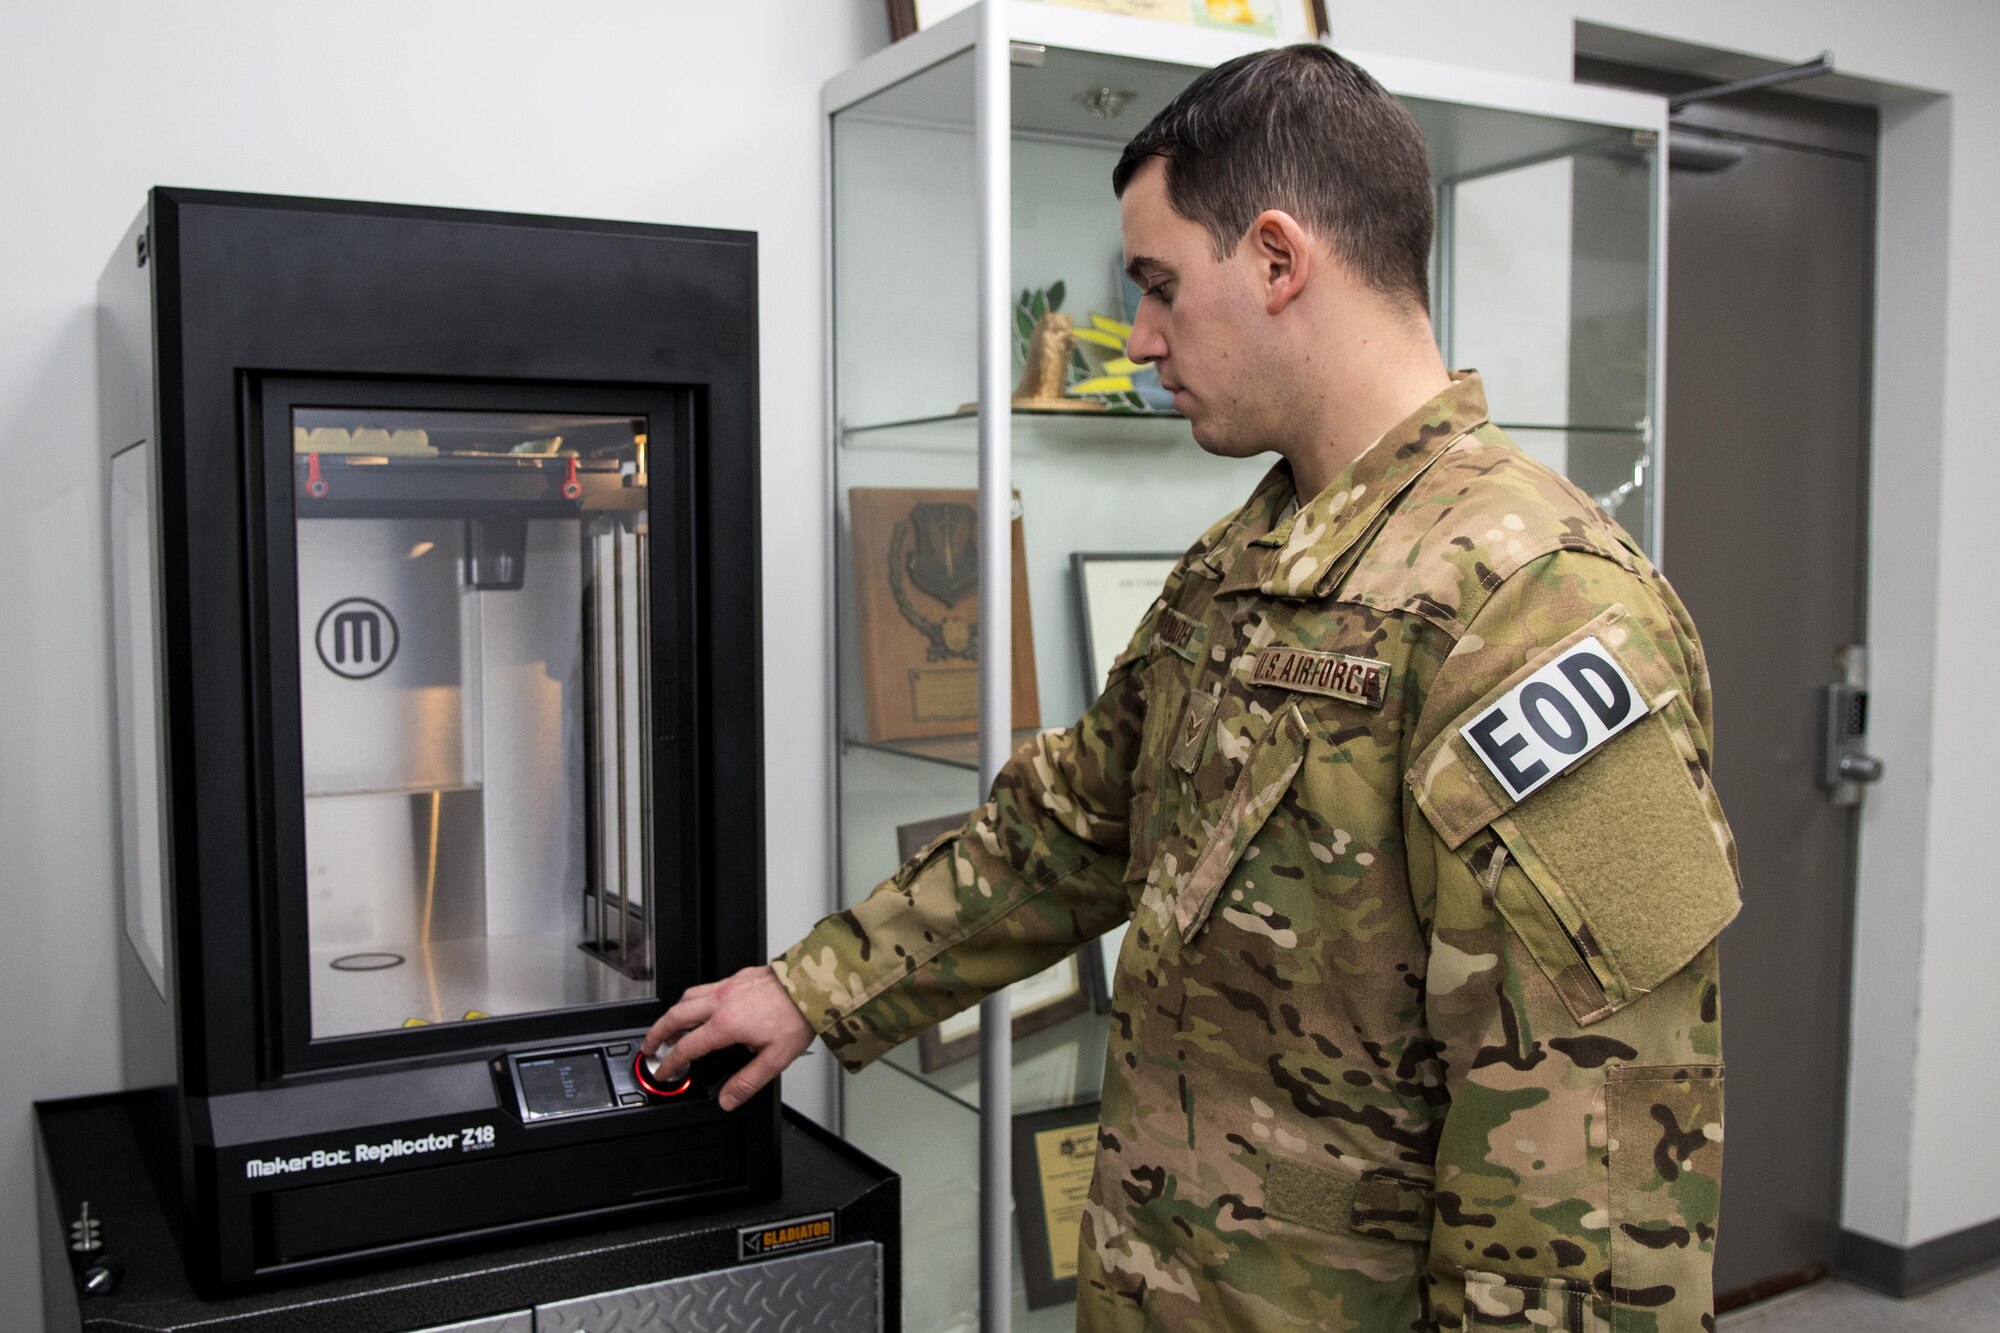 Senior Airman Nathanael Banden, 4th Civil Engineer Squadron explosive ordnance disposal technician, checks on the 3-D printer as it prints a training aid, Dec. 14, 2016, at Seymour Johnson Air Force Base, North Carolina. Printing jobs can take anywhere from 10 to more than 48 hours to complete, depending on the size and complexity of the training aid. (U.S. Air Force photo by Airman Shawna L. Keyes)